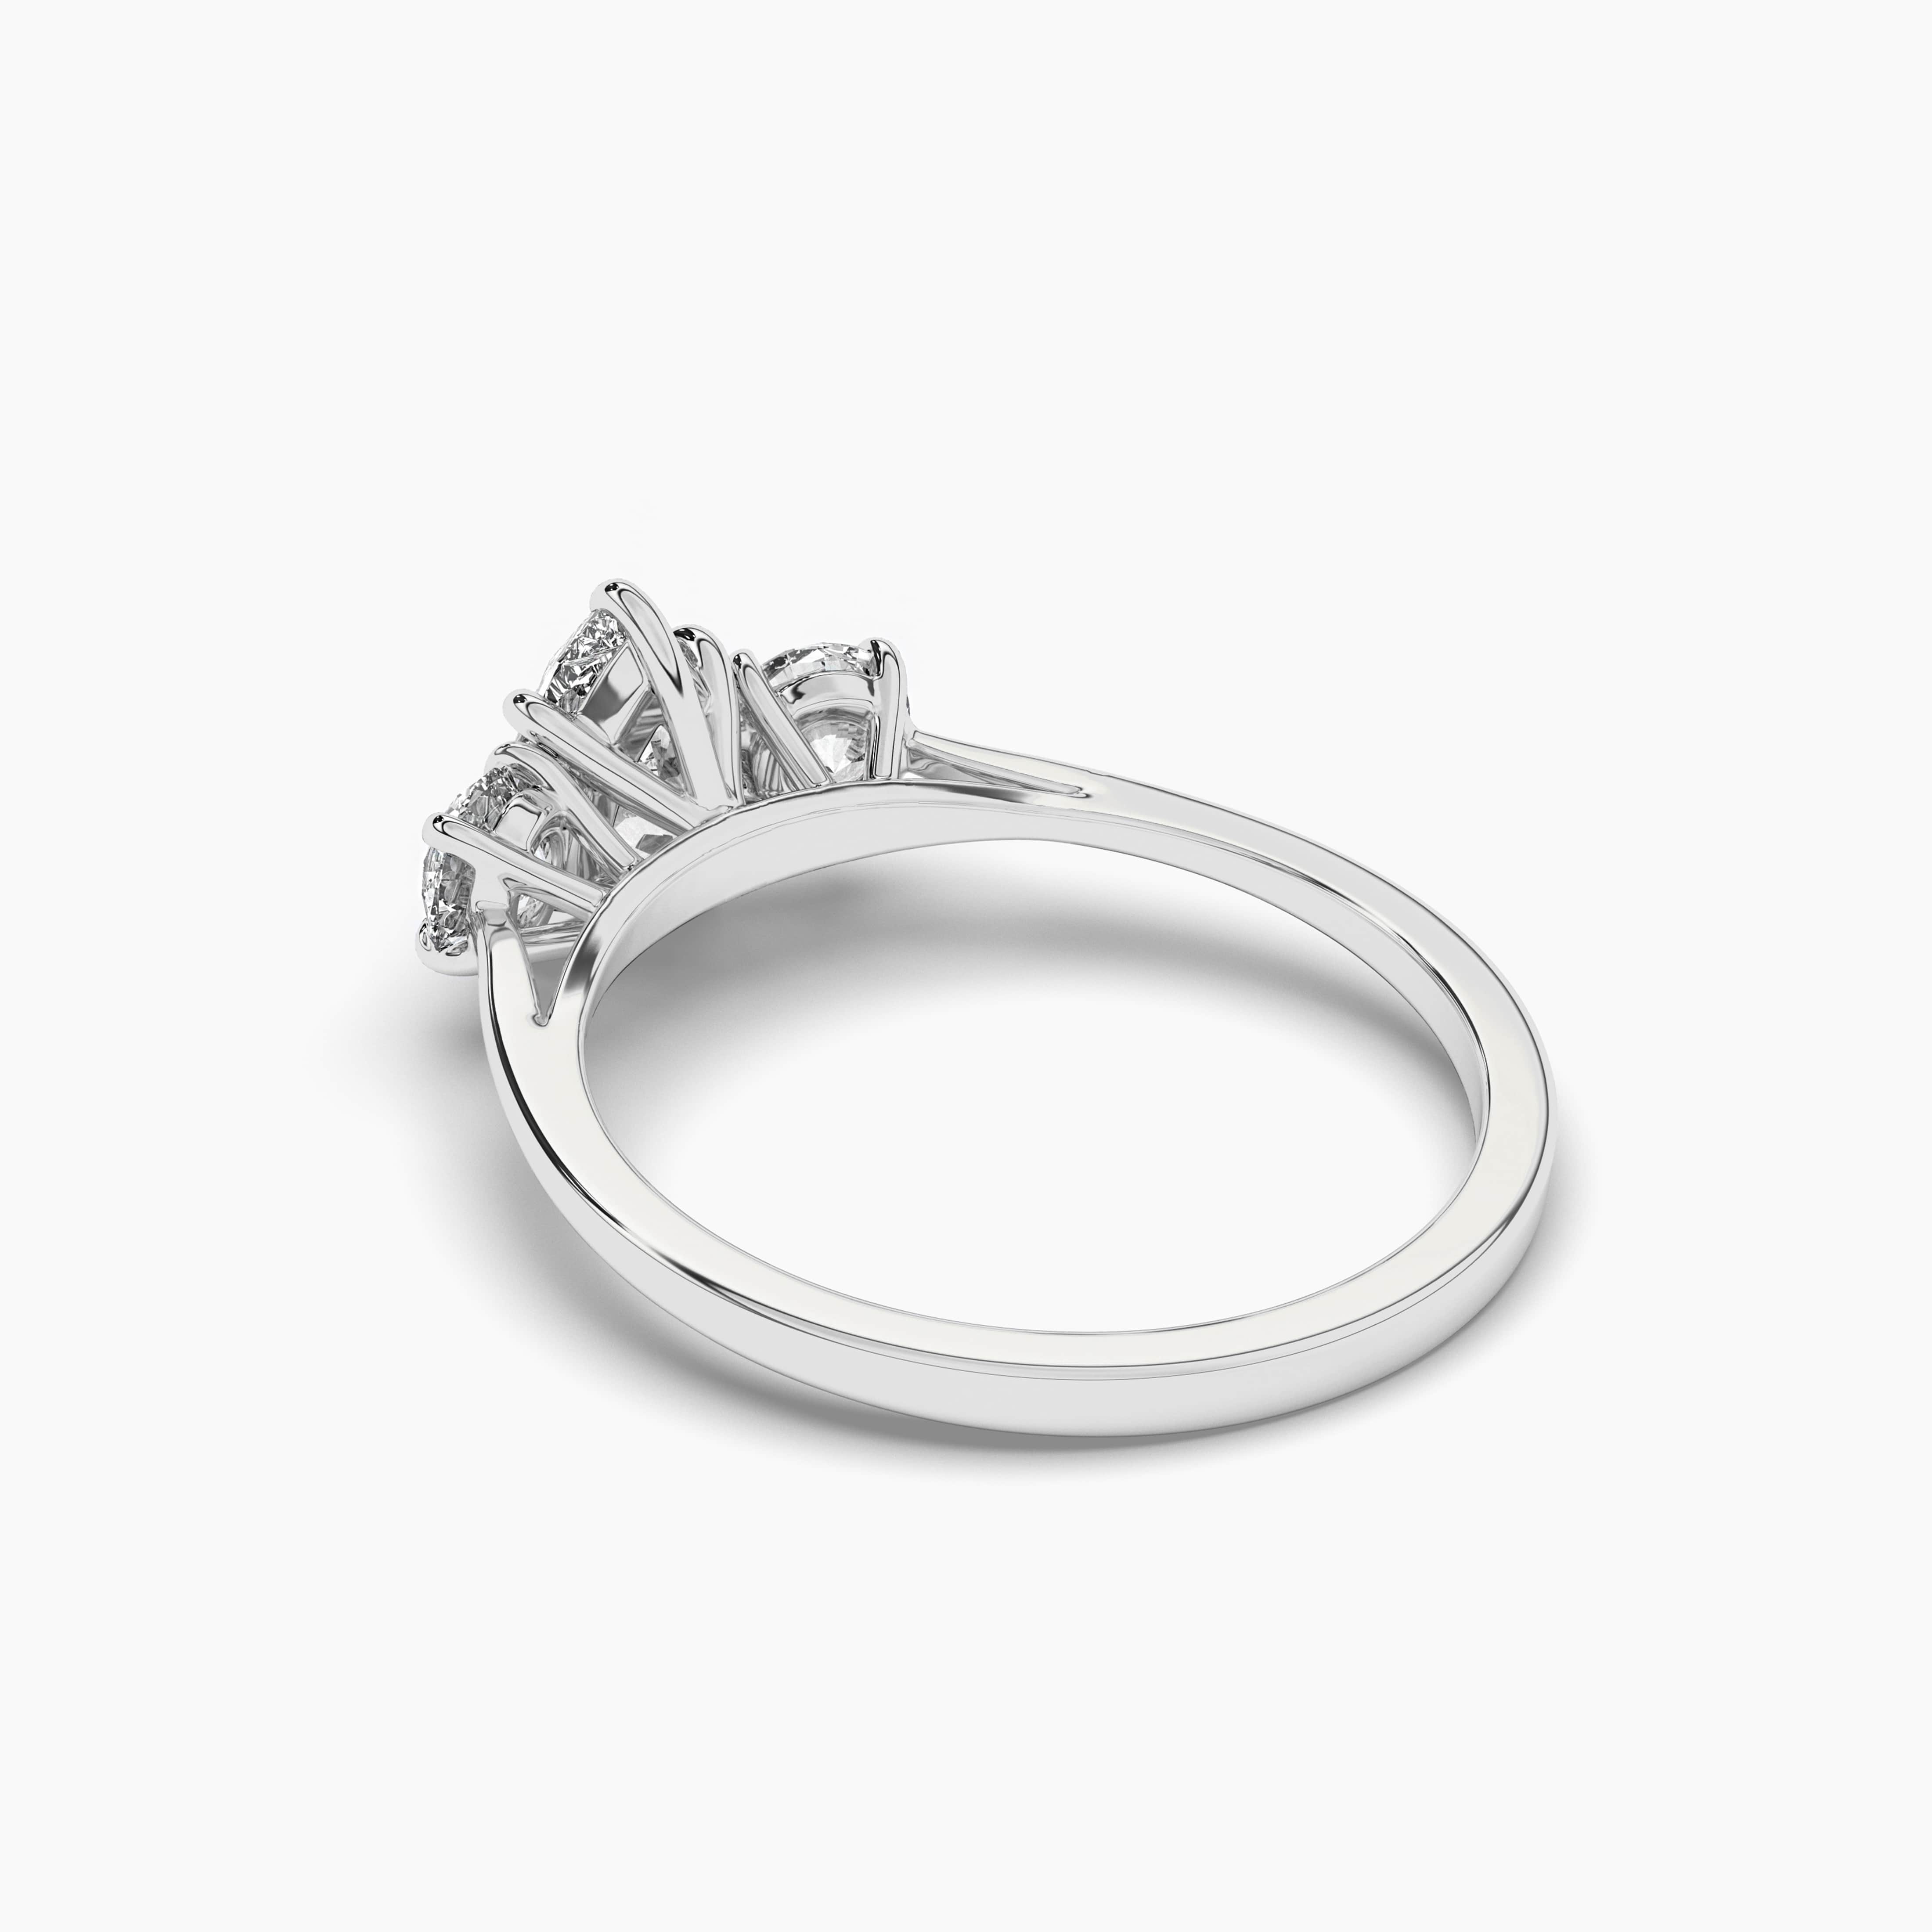 The Three Stone Pear Engagement Ring White Gold